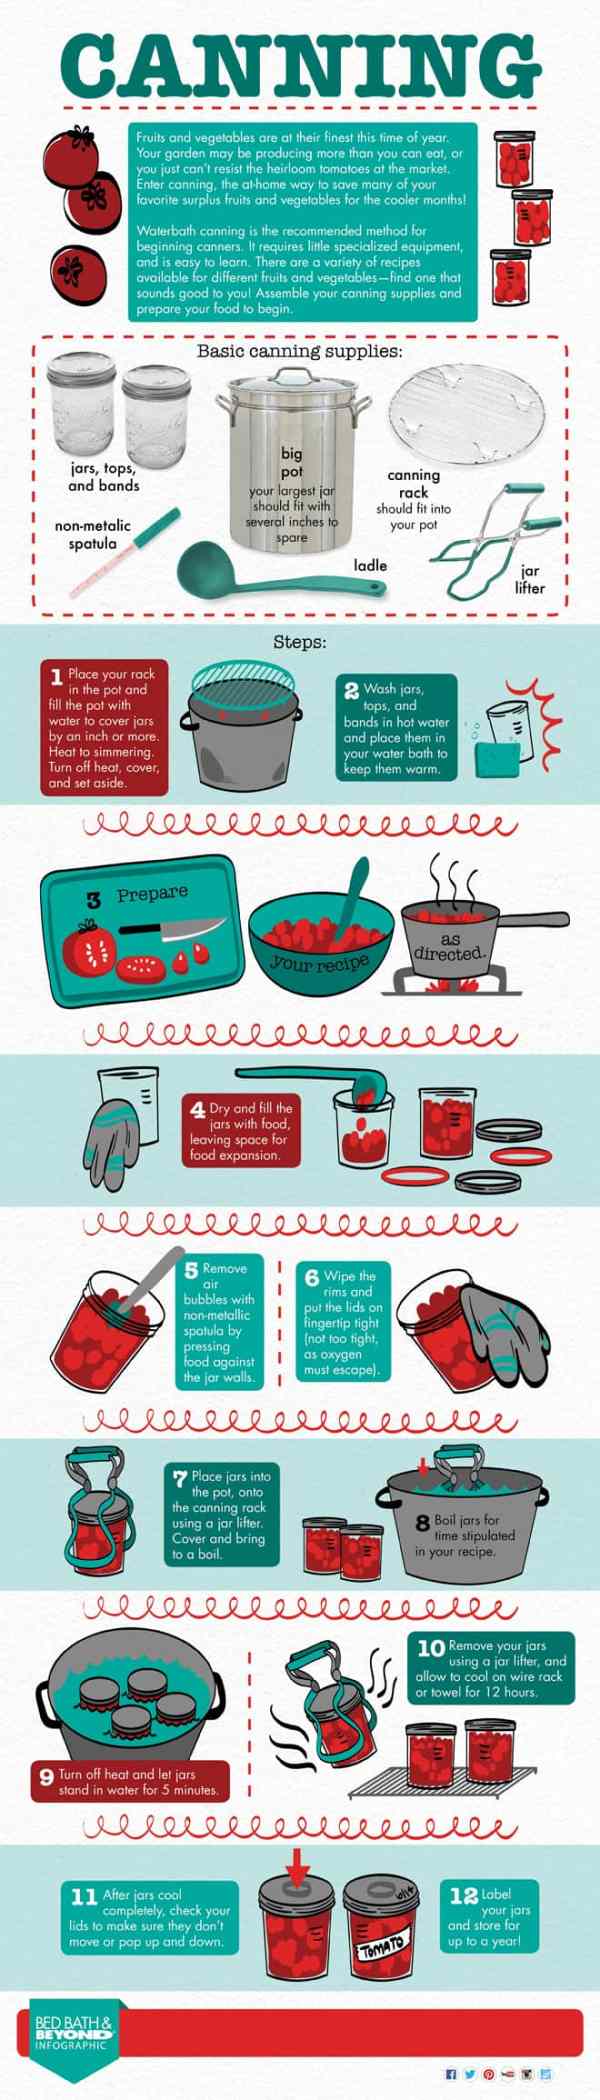 Canning At Home – Tips For True Beginners